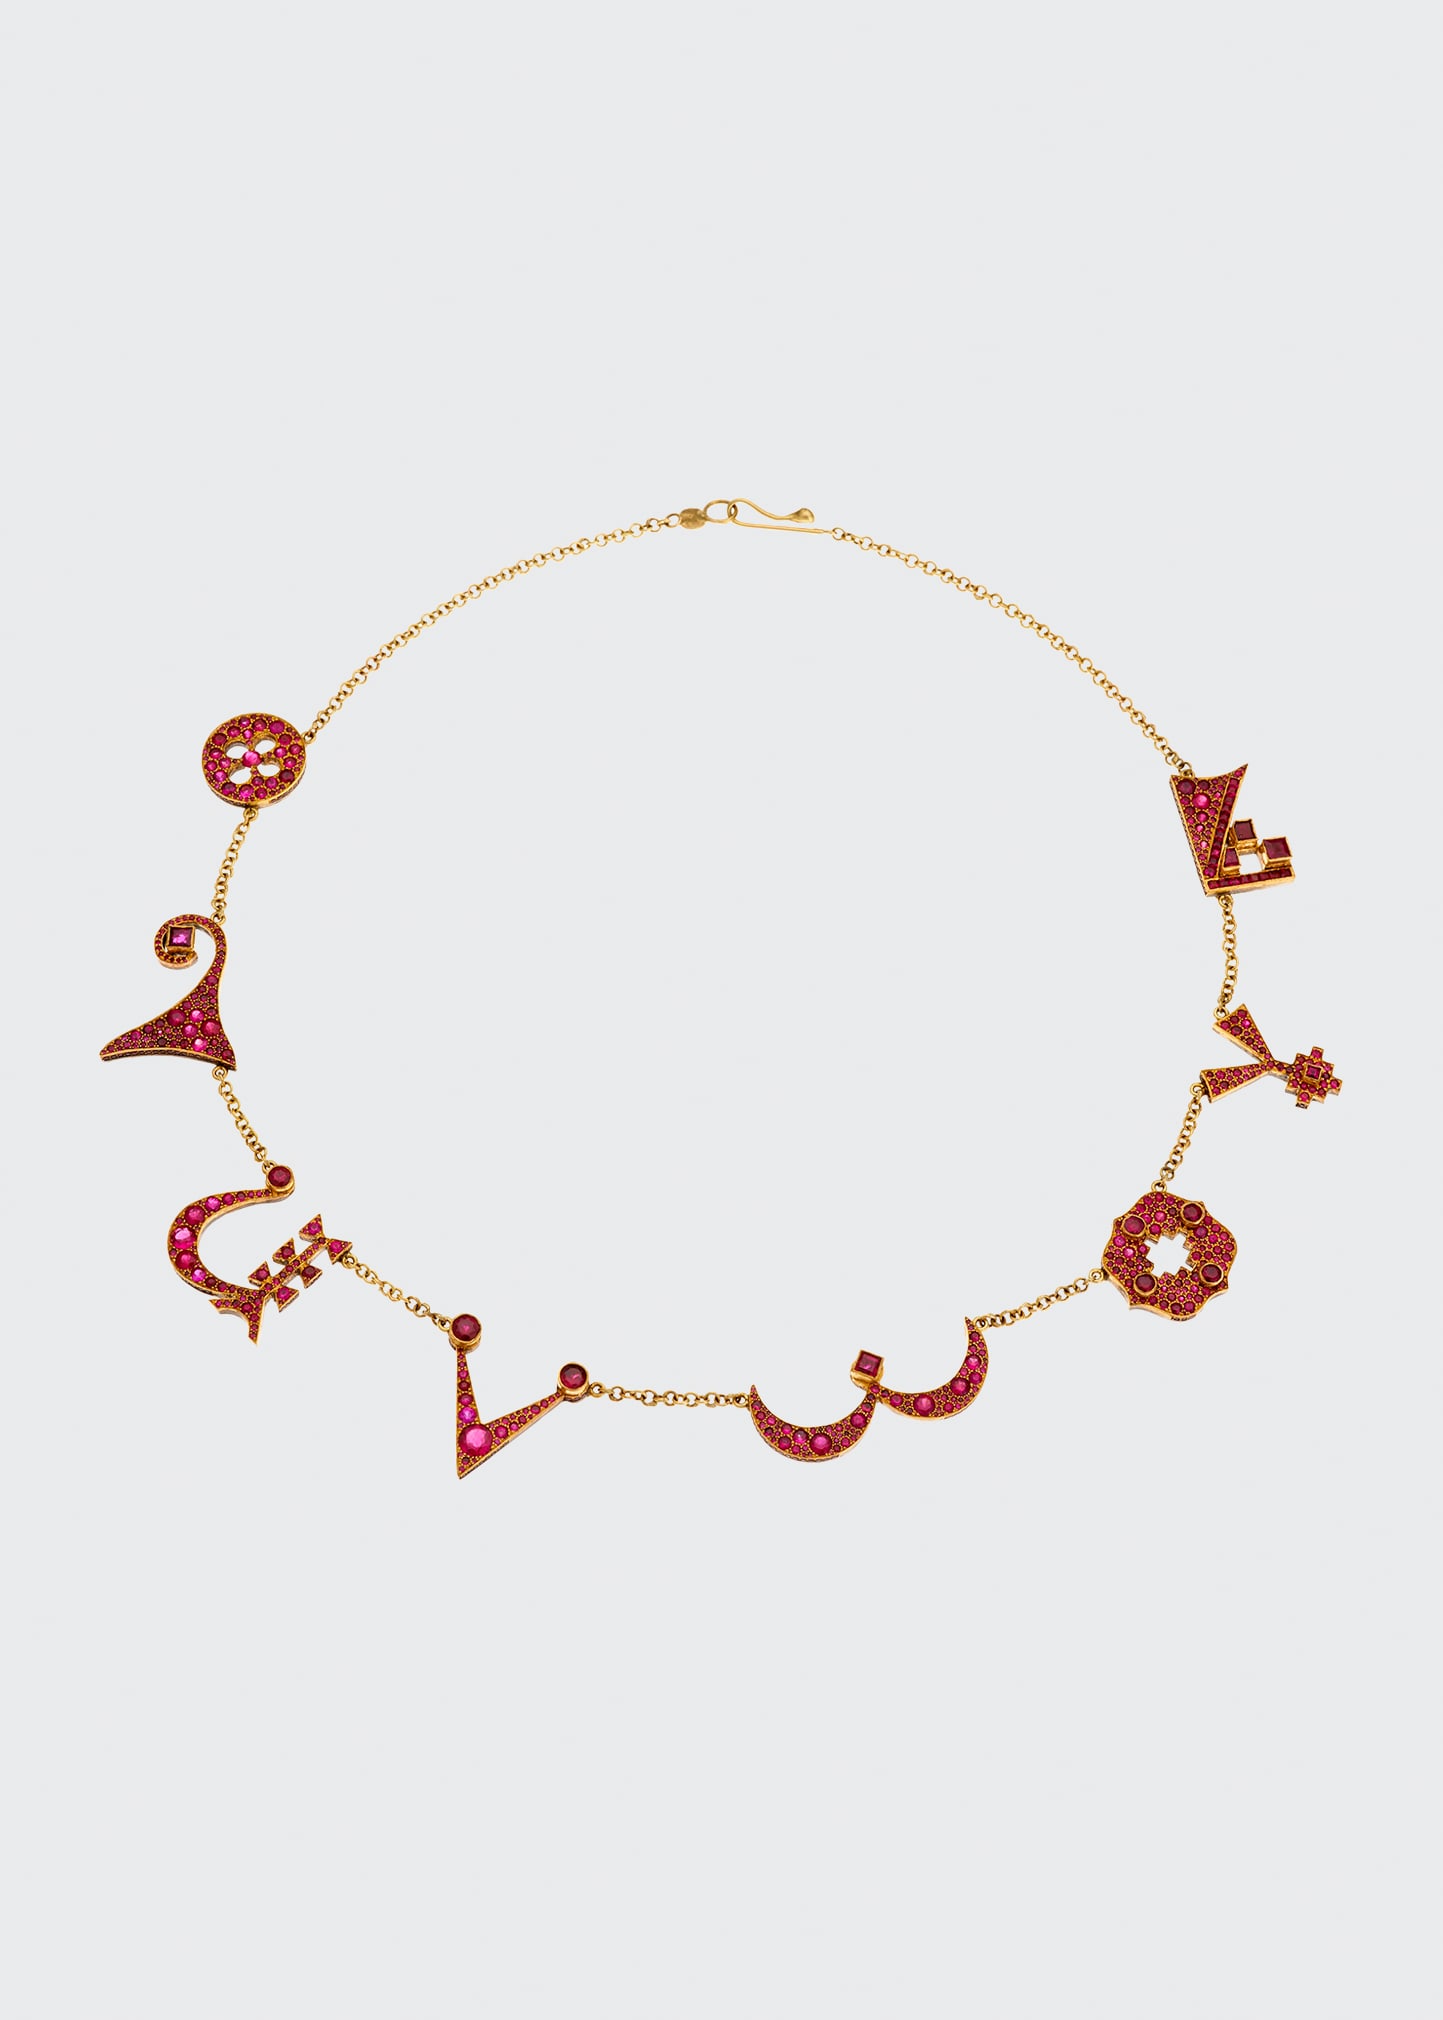 JUDY GEIB I Love You Jumbled Necklace with Rubies